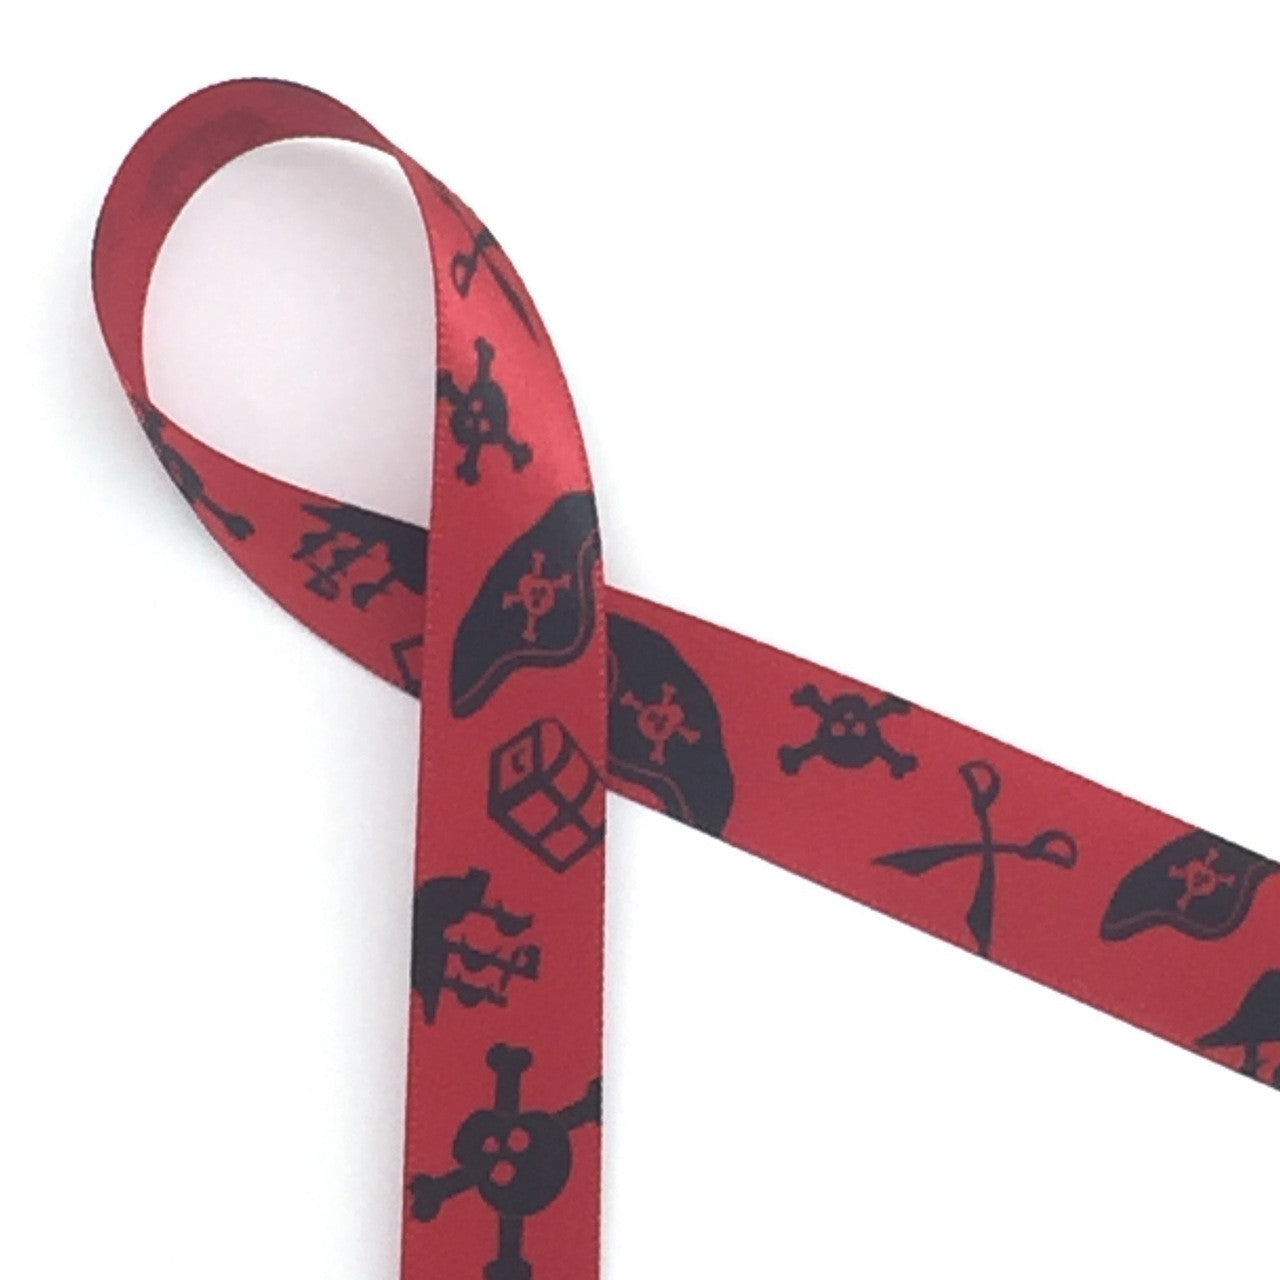 Pirate silhouettes in black on 5/8 red single face satin ribbon